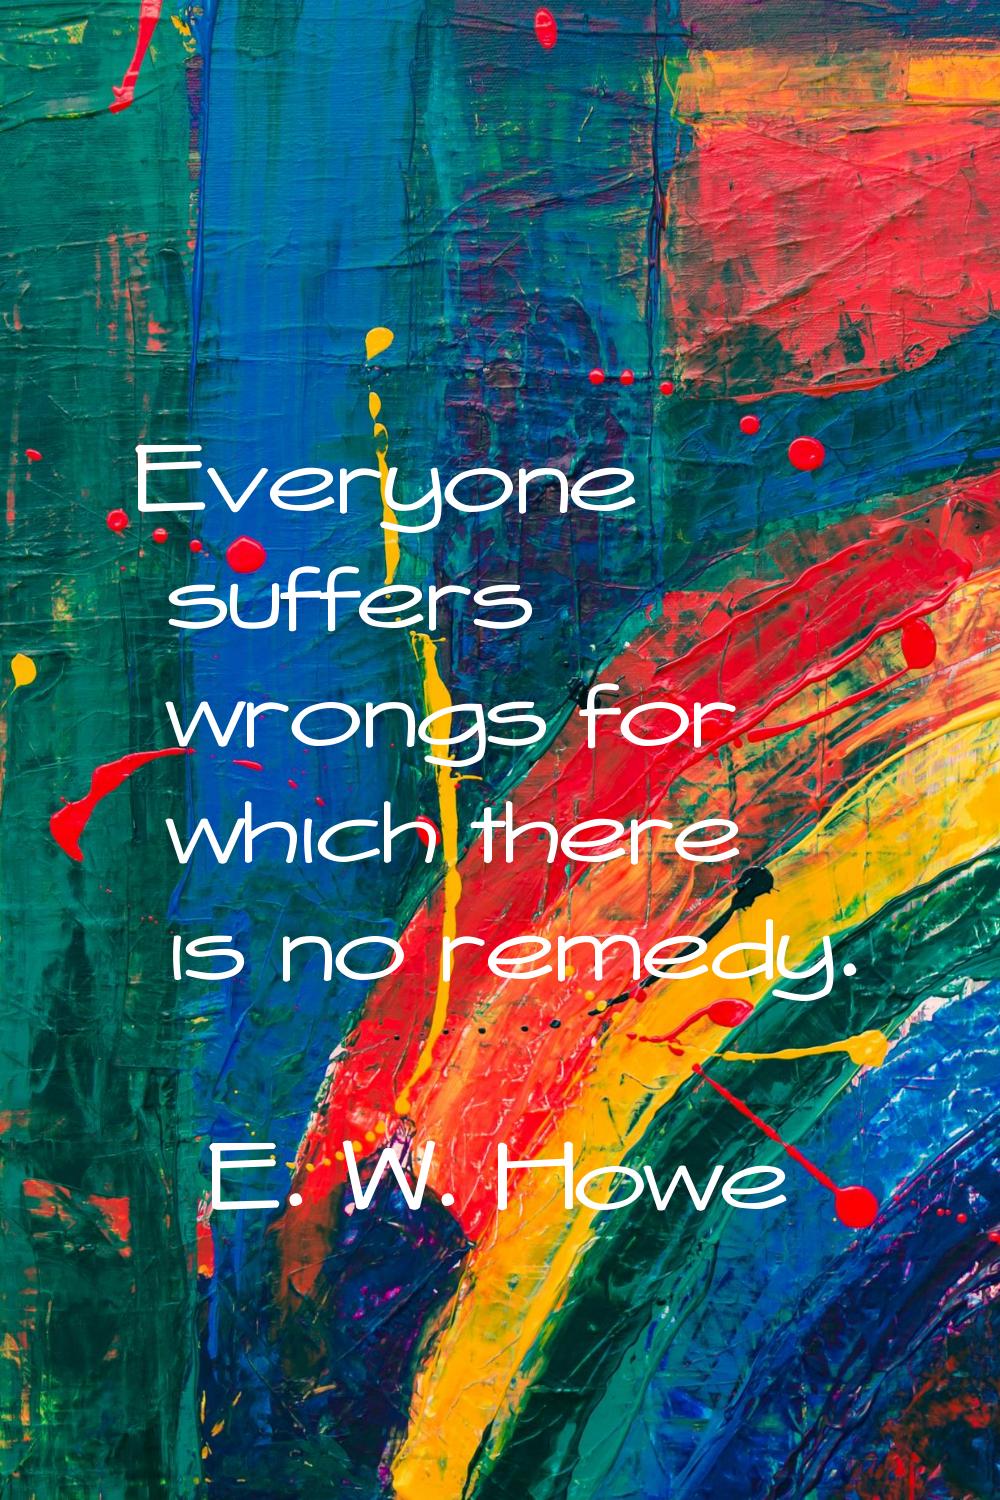 Everyone suffers wrongs for which there is no remedy.